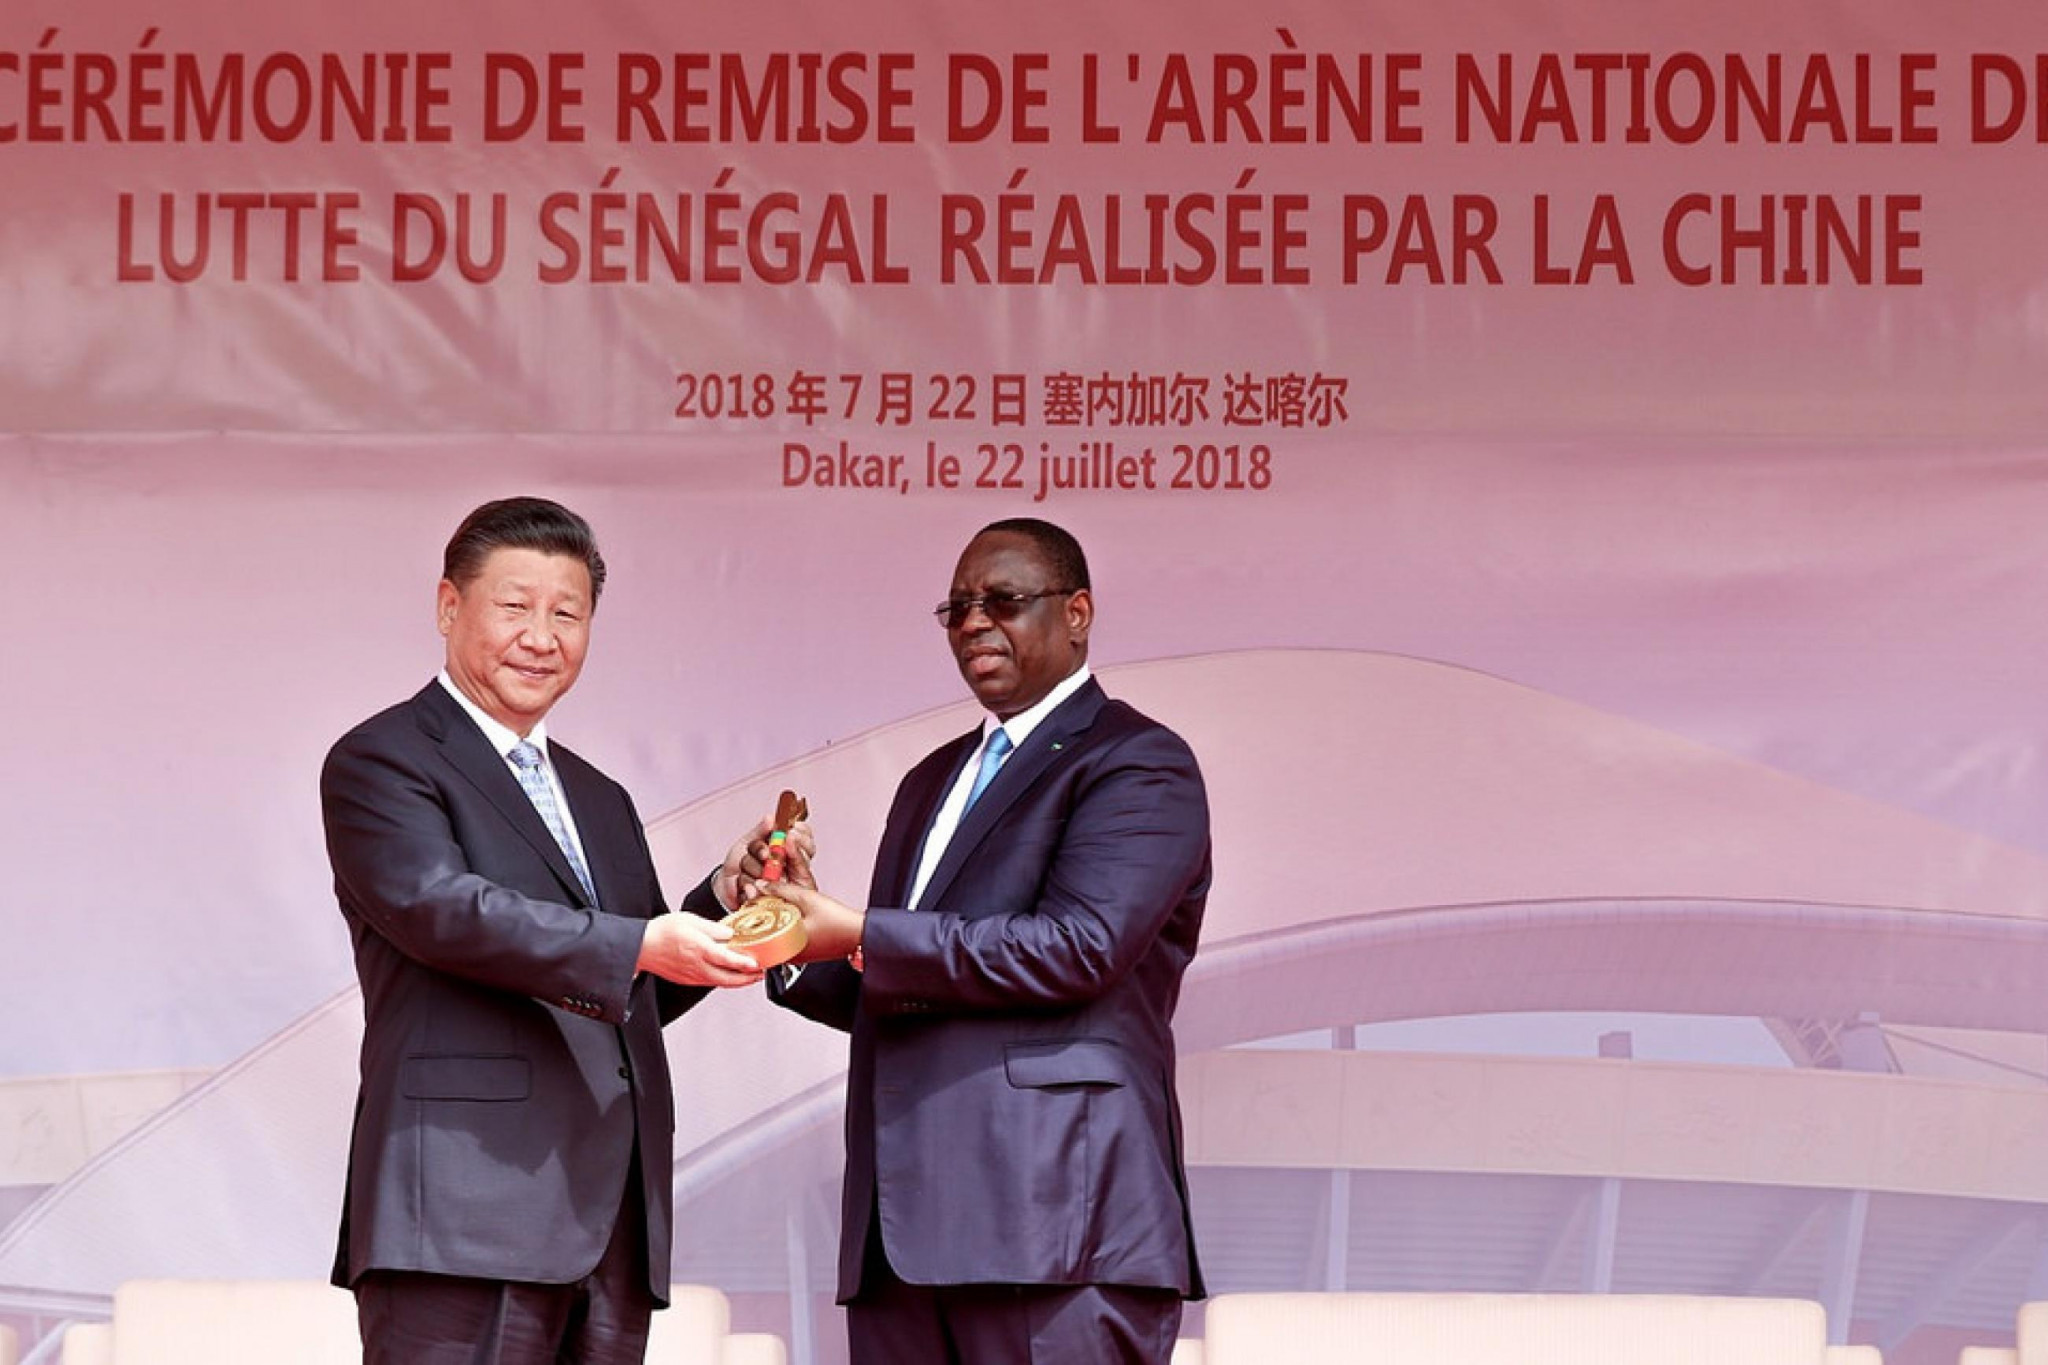 China's President Xi Jinping attended the grand opening of the Wrestling Arena of Senegal ©UWW